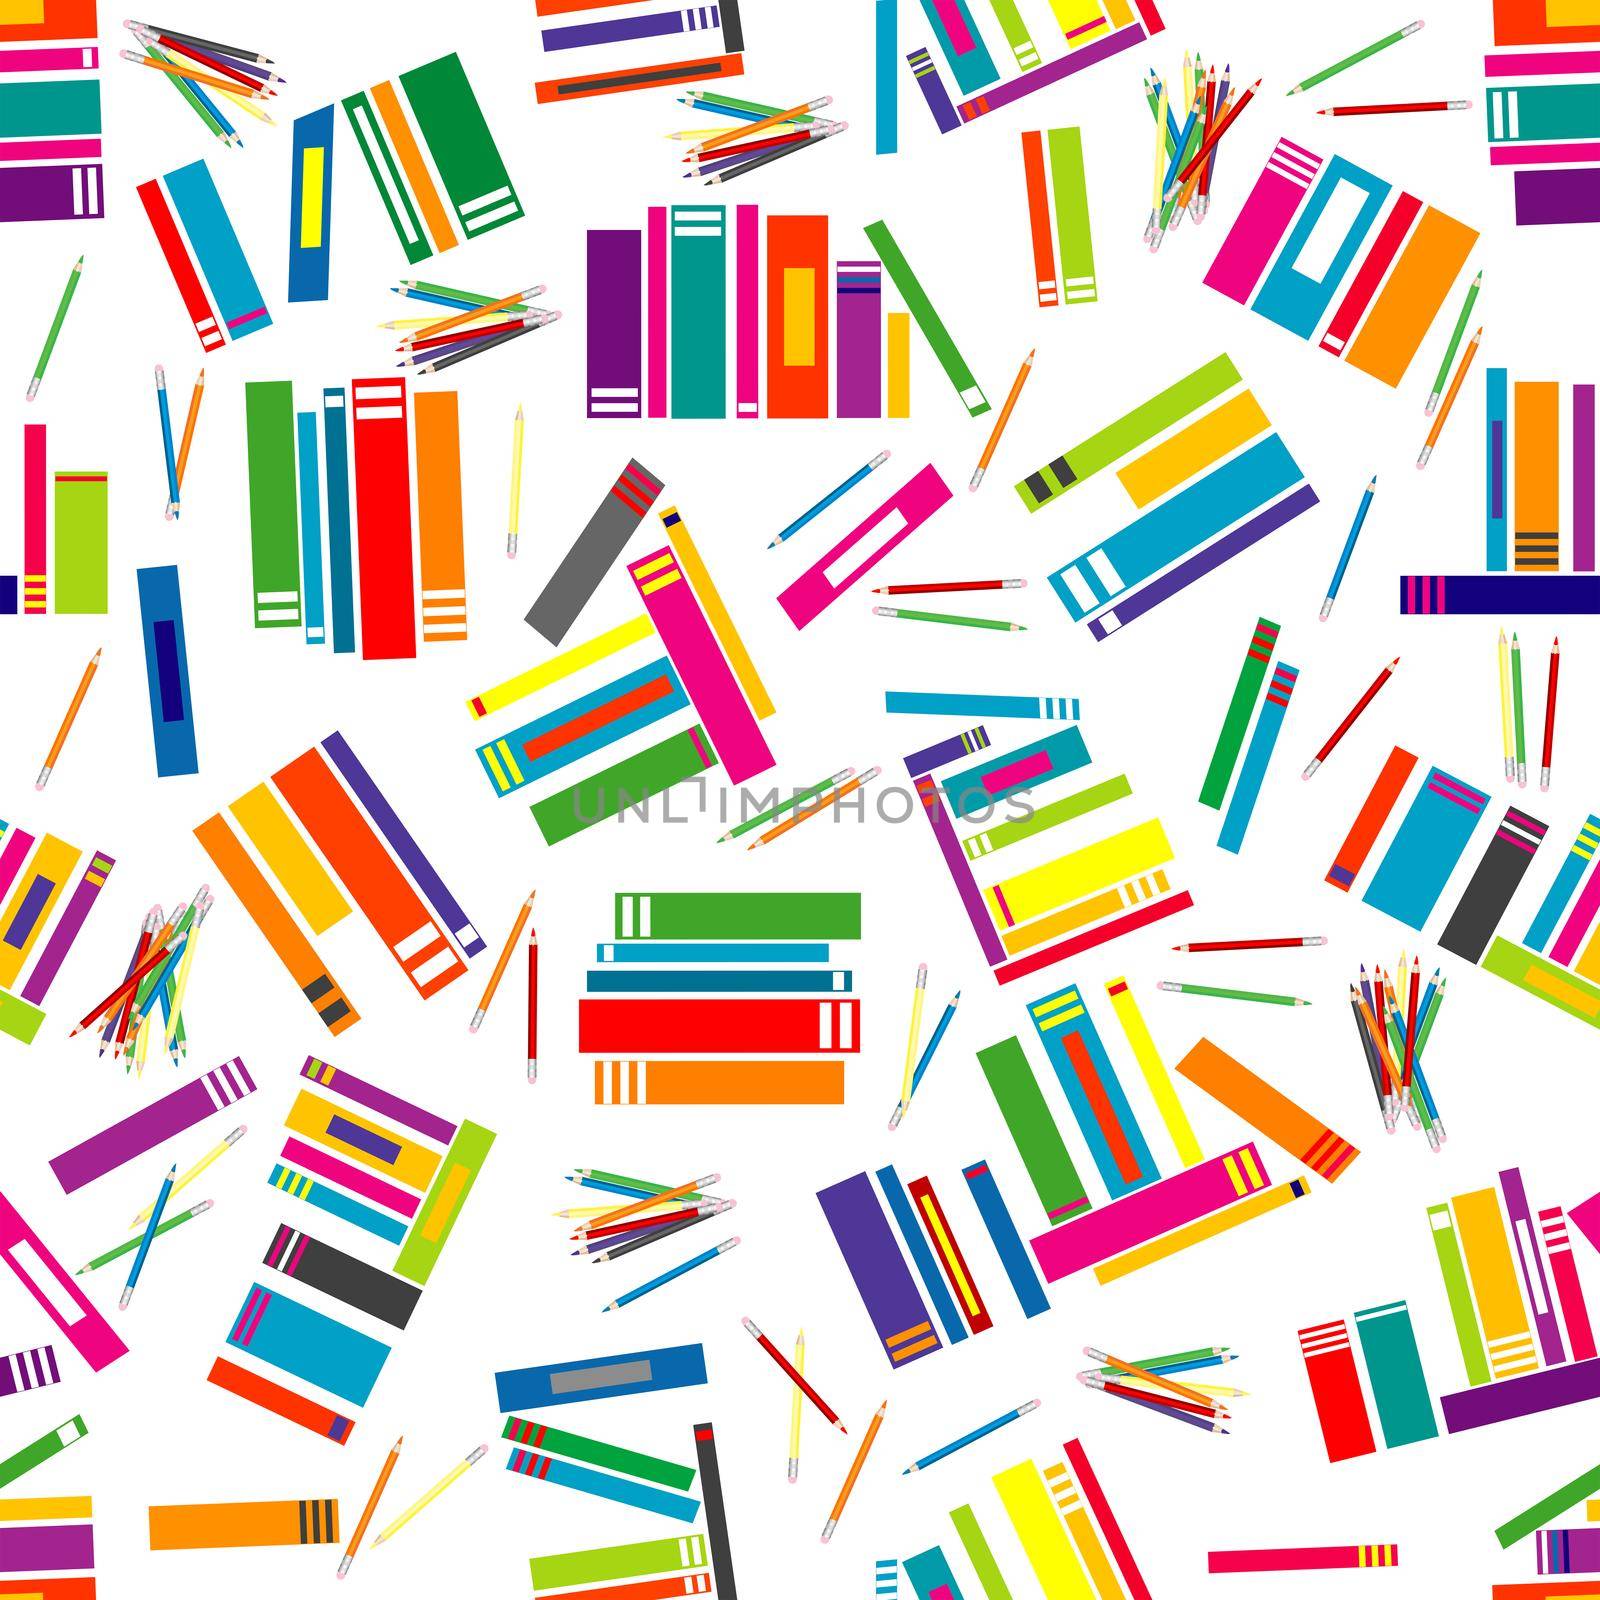 Wrapping paper with colored books and pencils by hibrida13